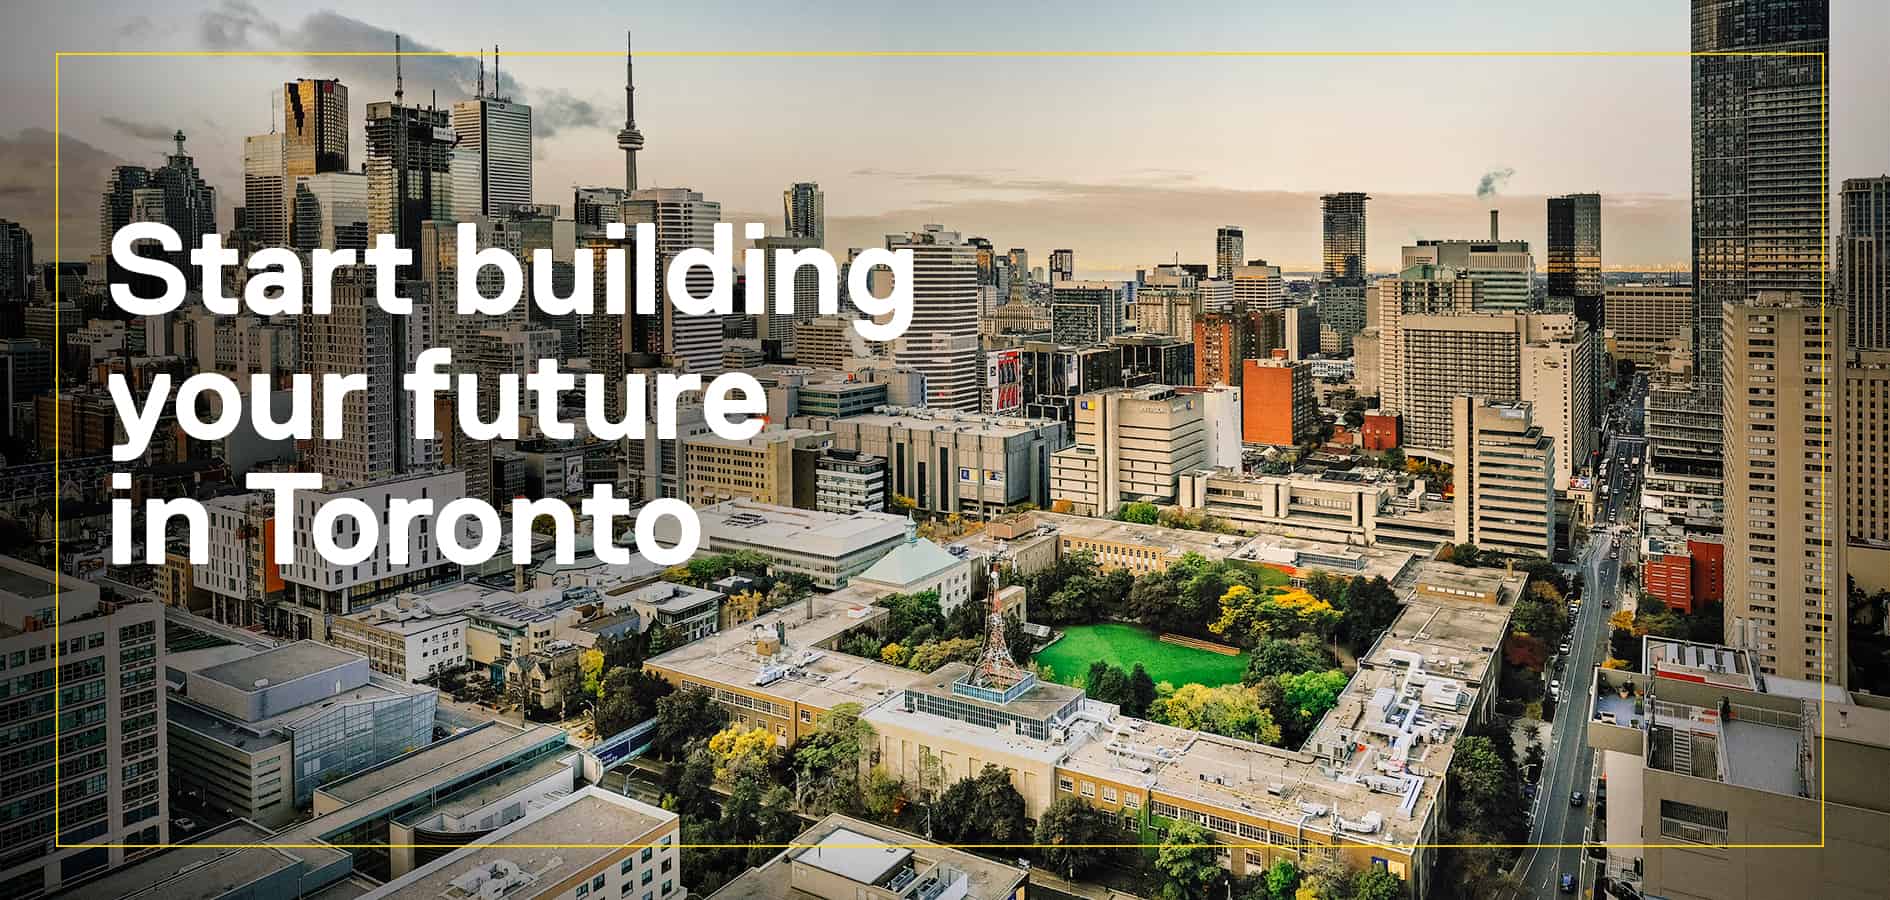 Start building your future in Toronto